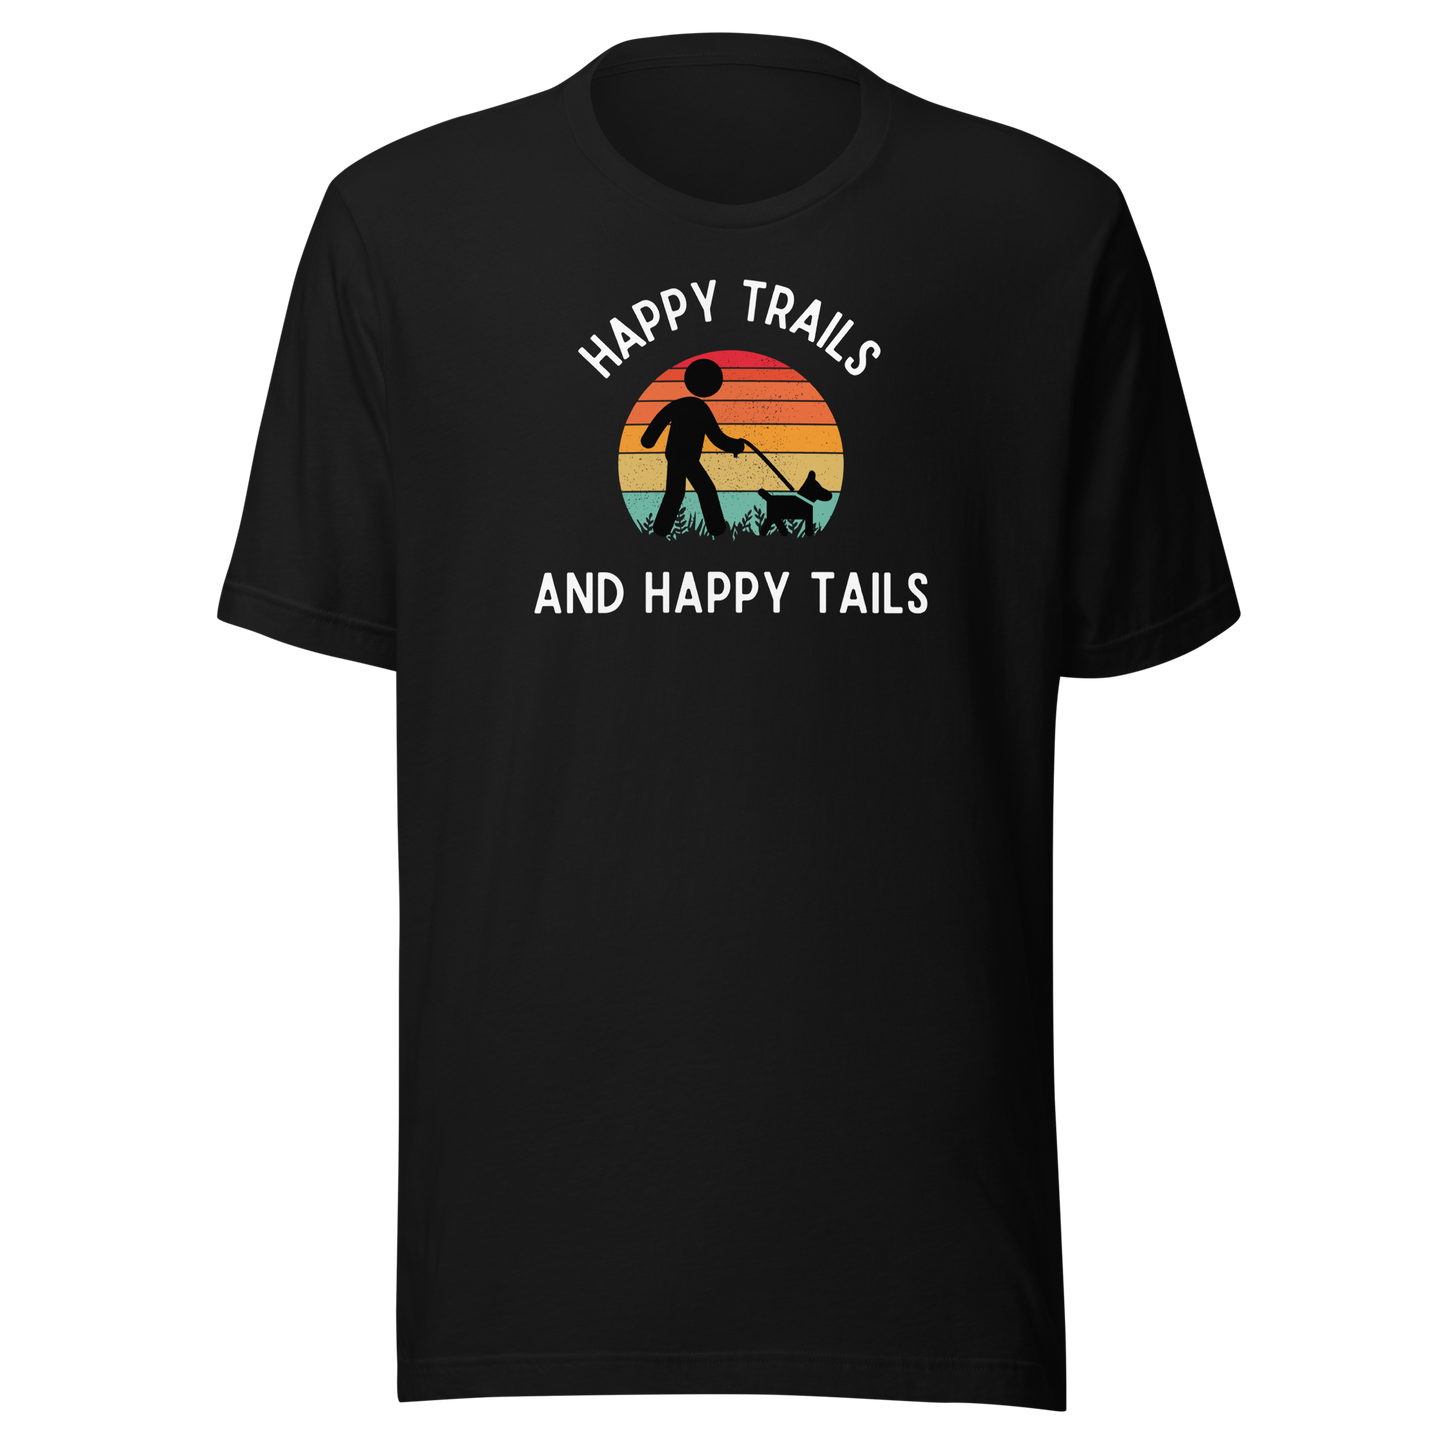 Happy Trails And Happy Tails Unisex T-Shirt